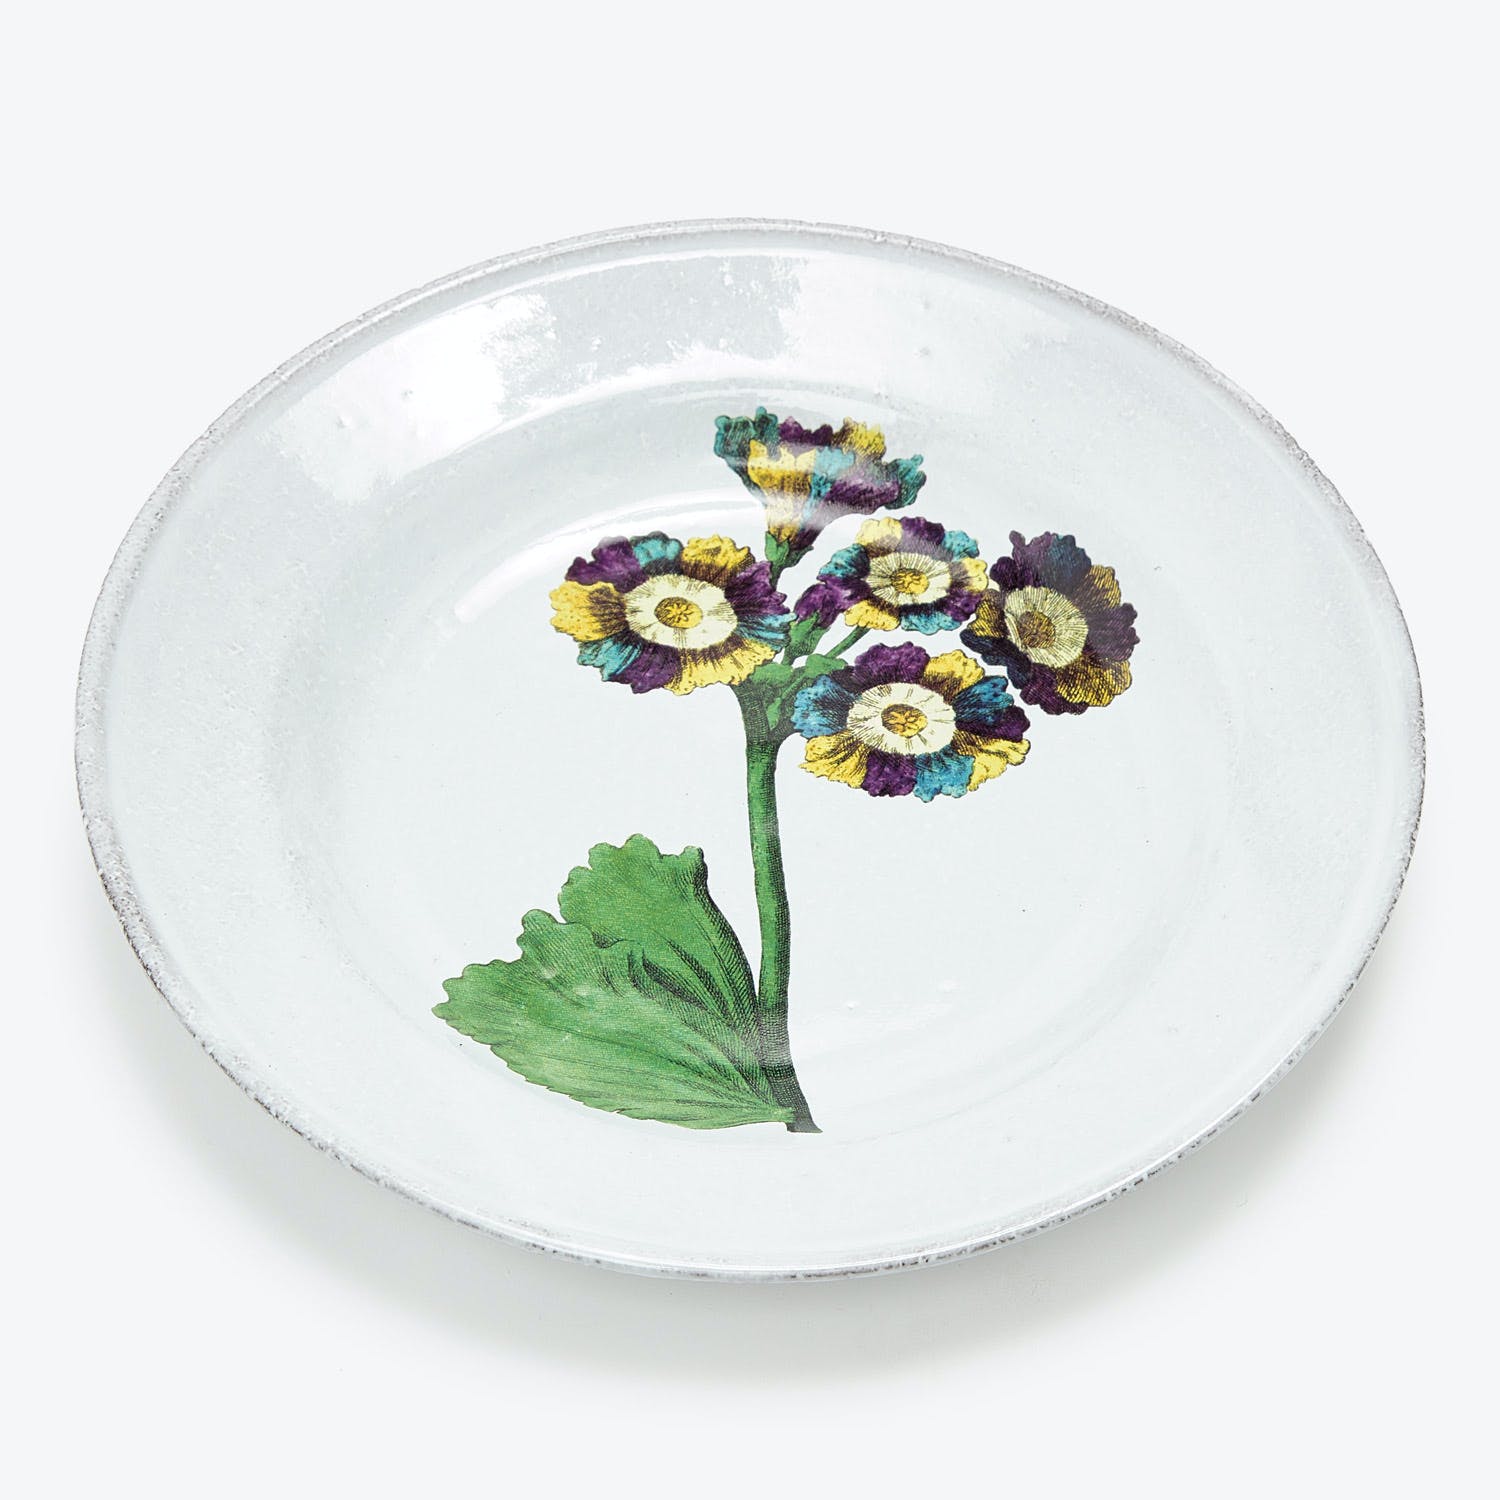 Handcrafted ceramic plate with rustic design featuring blooming floral illustration